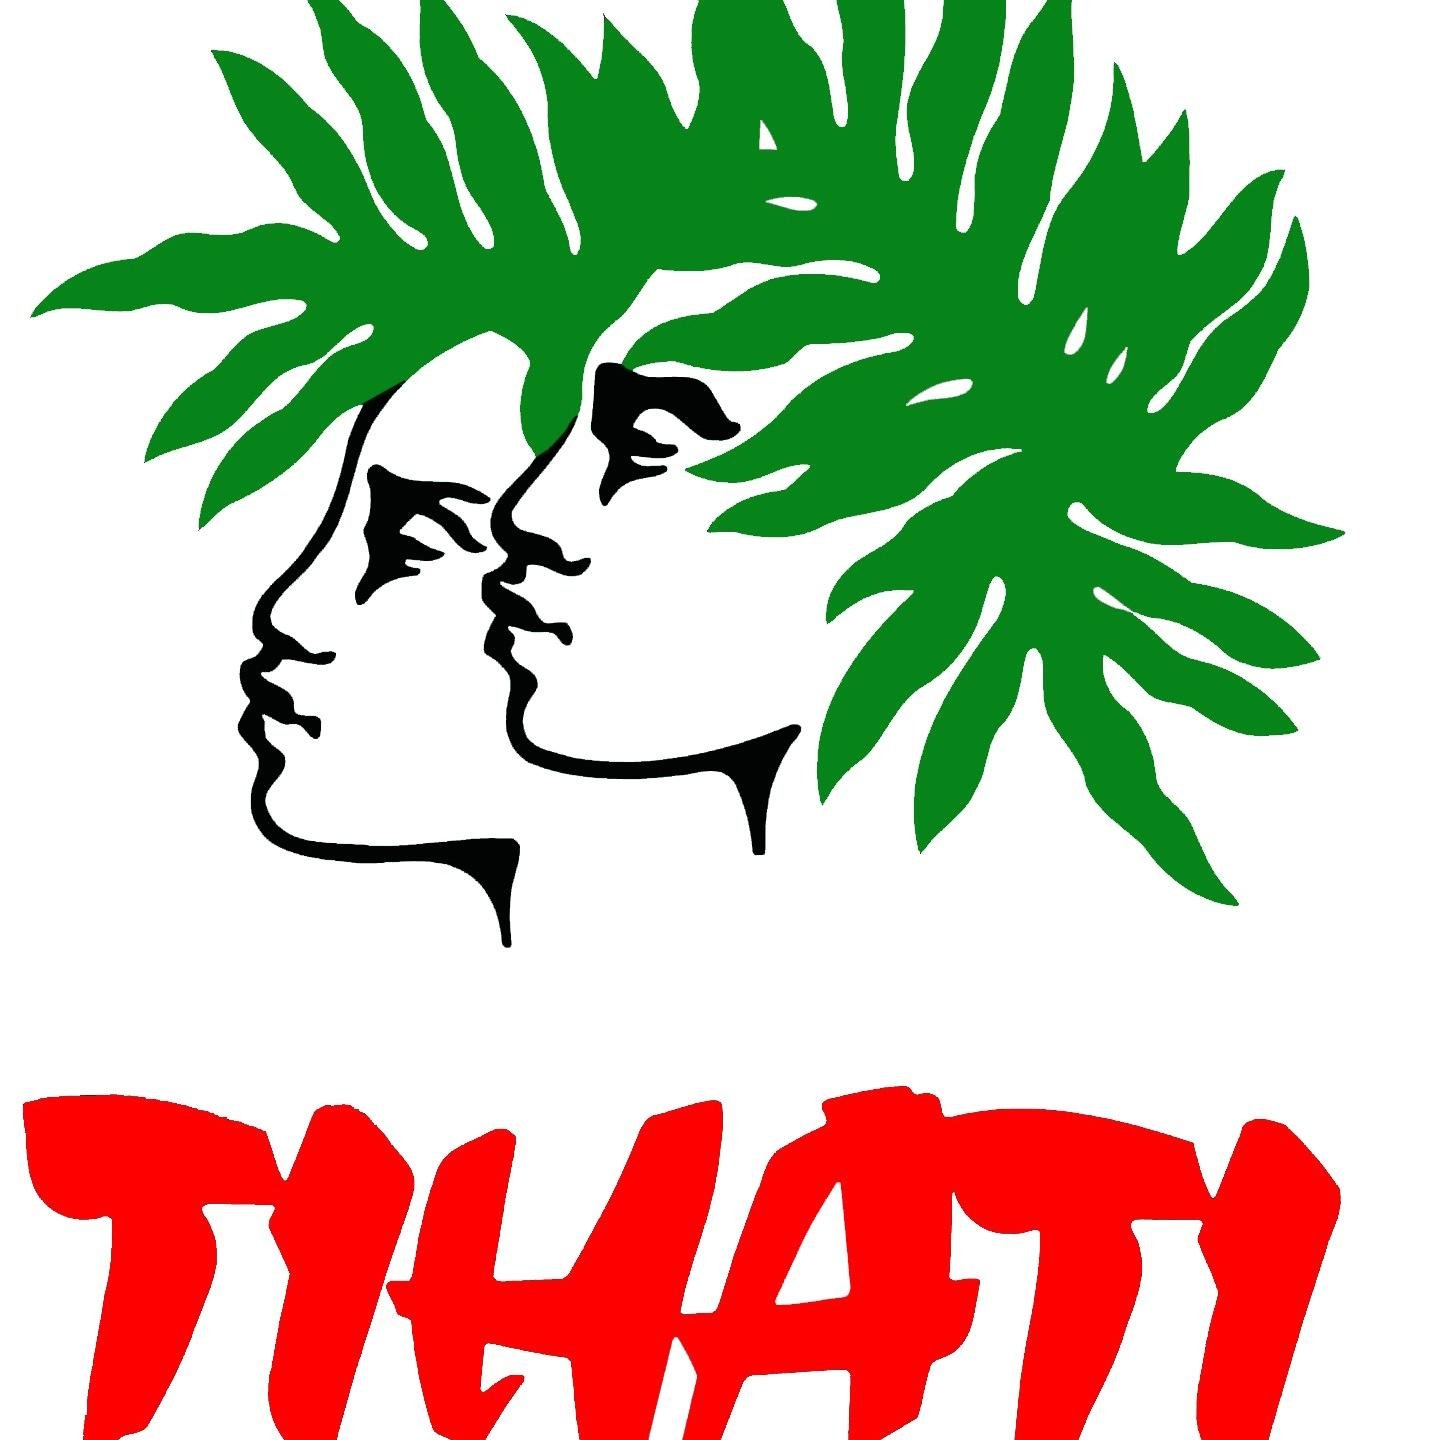 Tihati Productions Back On Track After 10 Months Of No Business